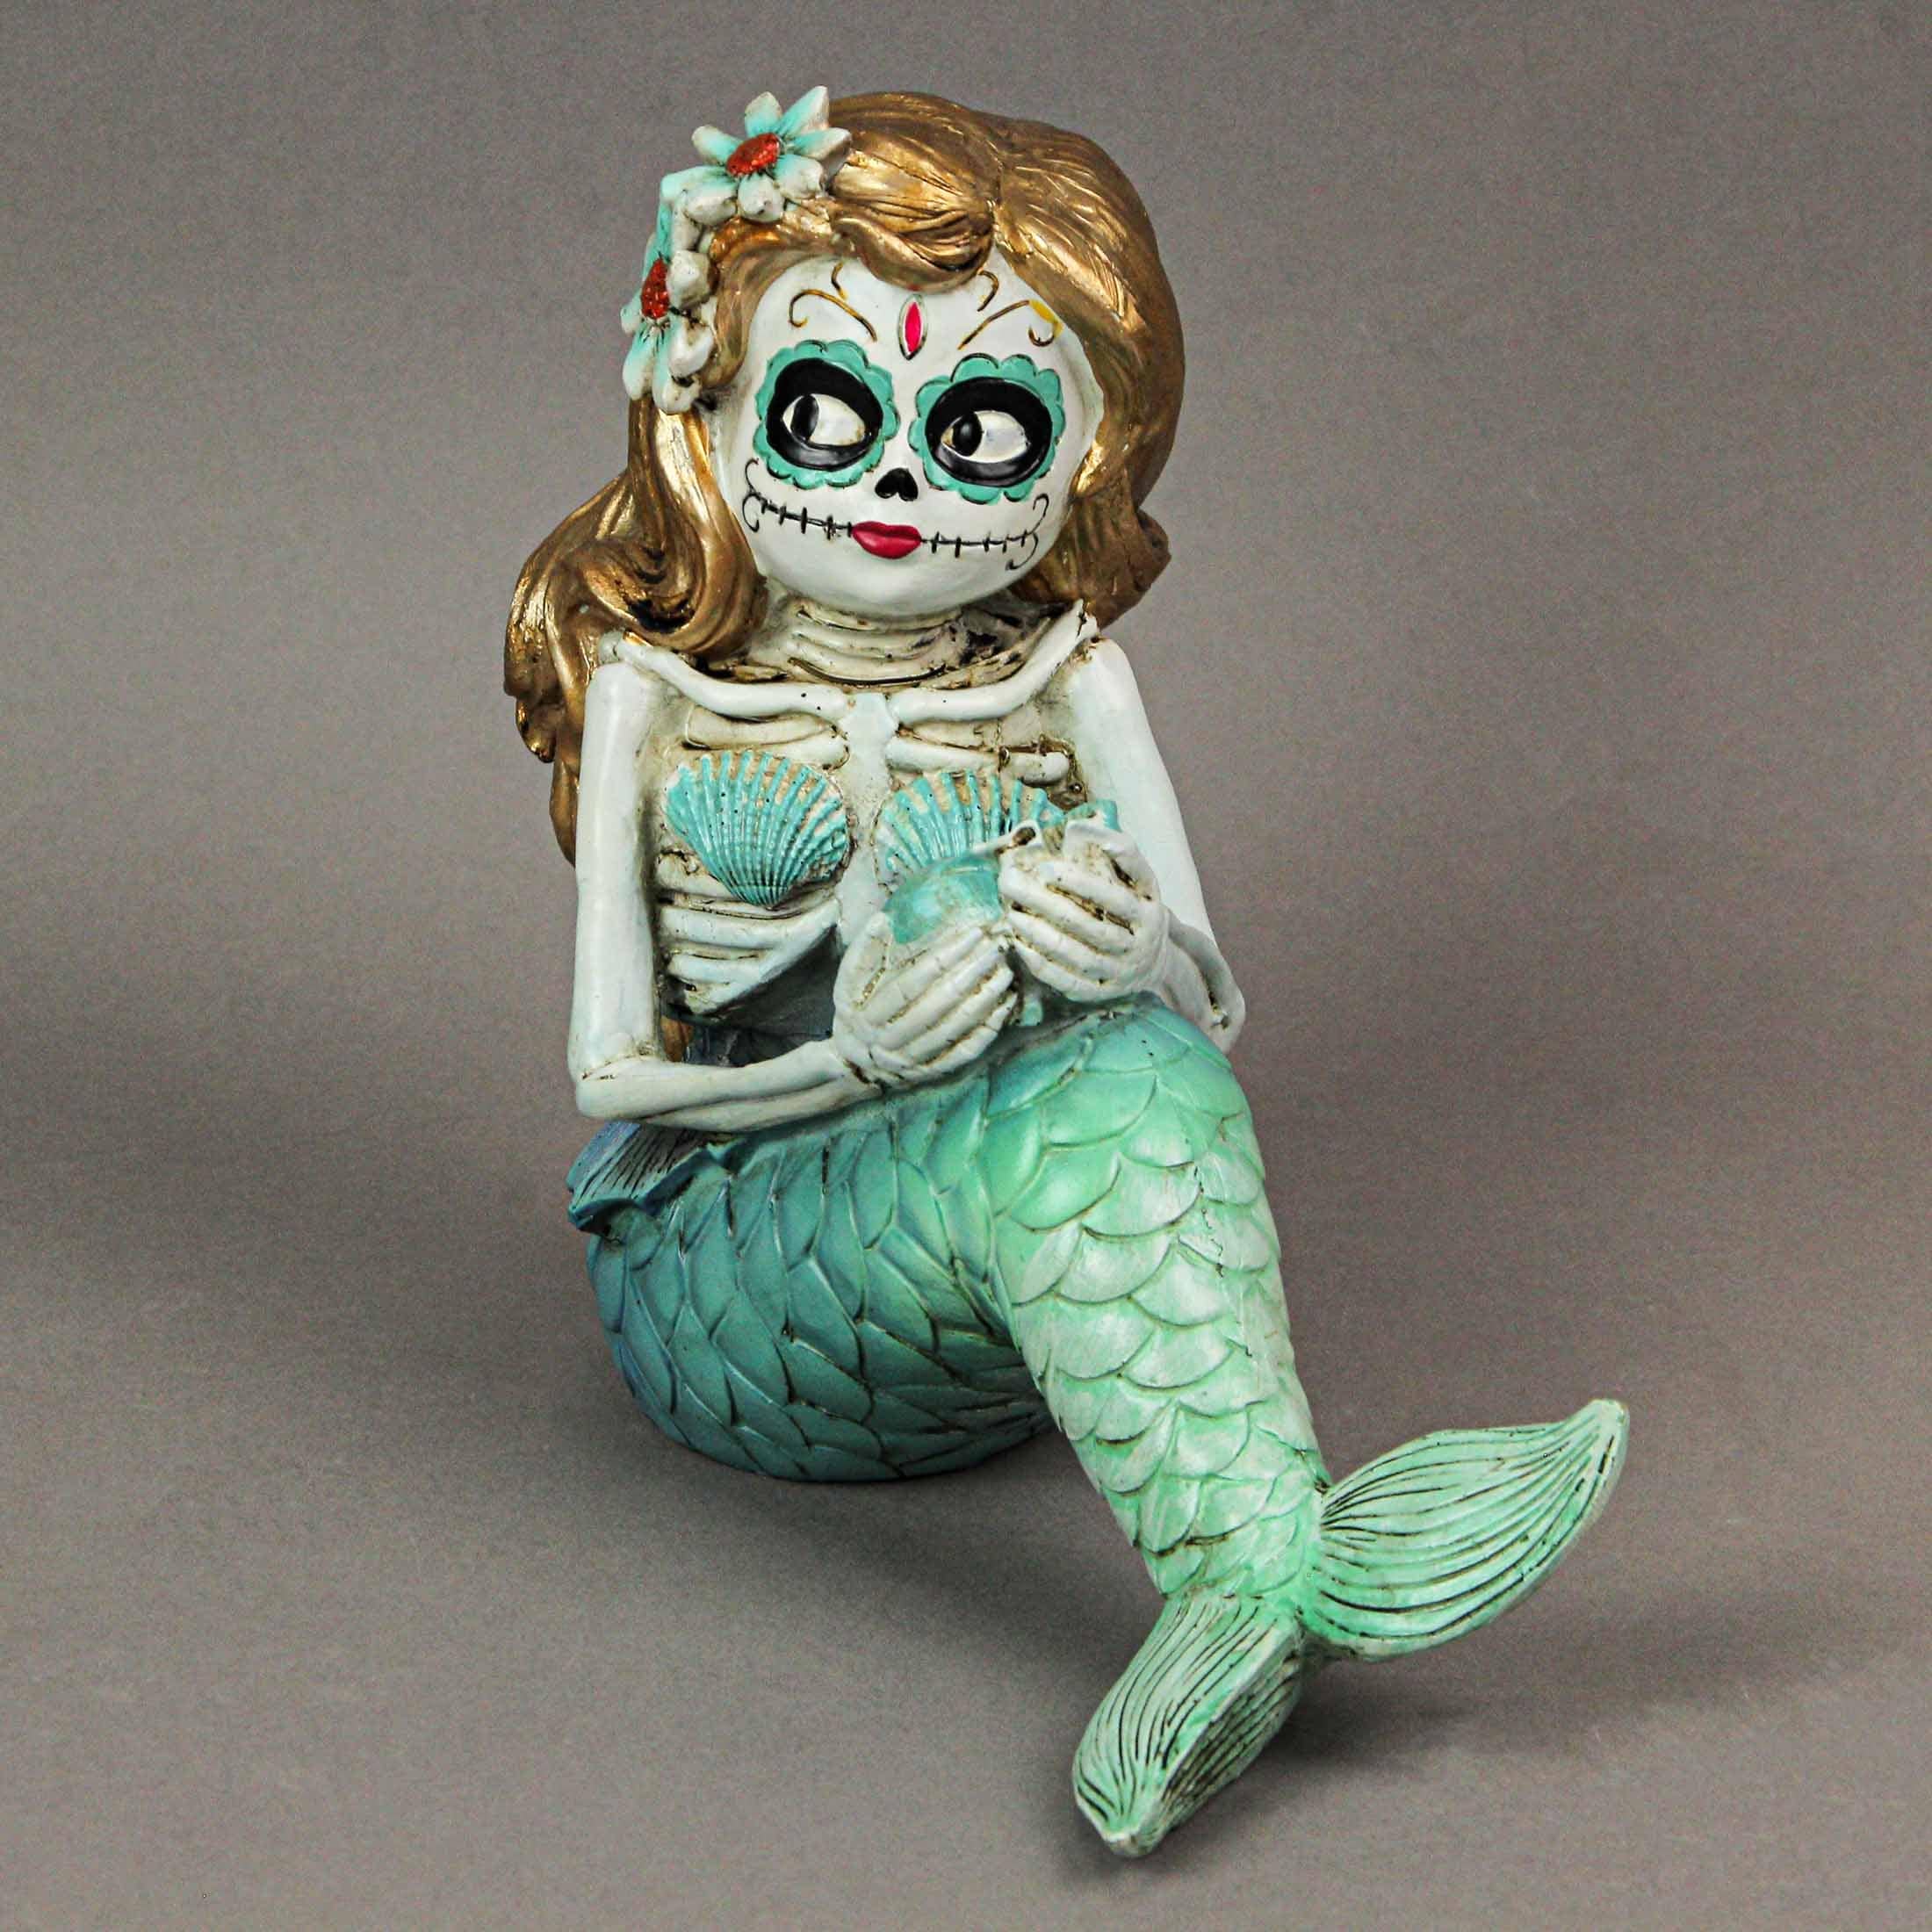 Day Of The Dead Sugar Skull Skeleton Mermaid Statue Inches High X 7.5  X 3.5 inches On Sale Bed Bath  Beyond 36701732